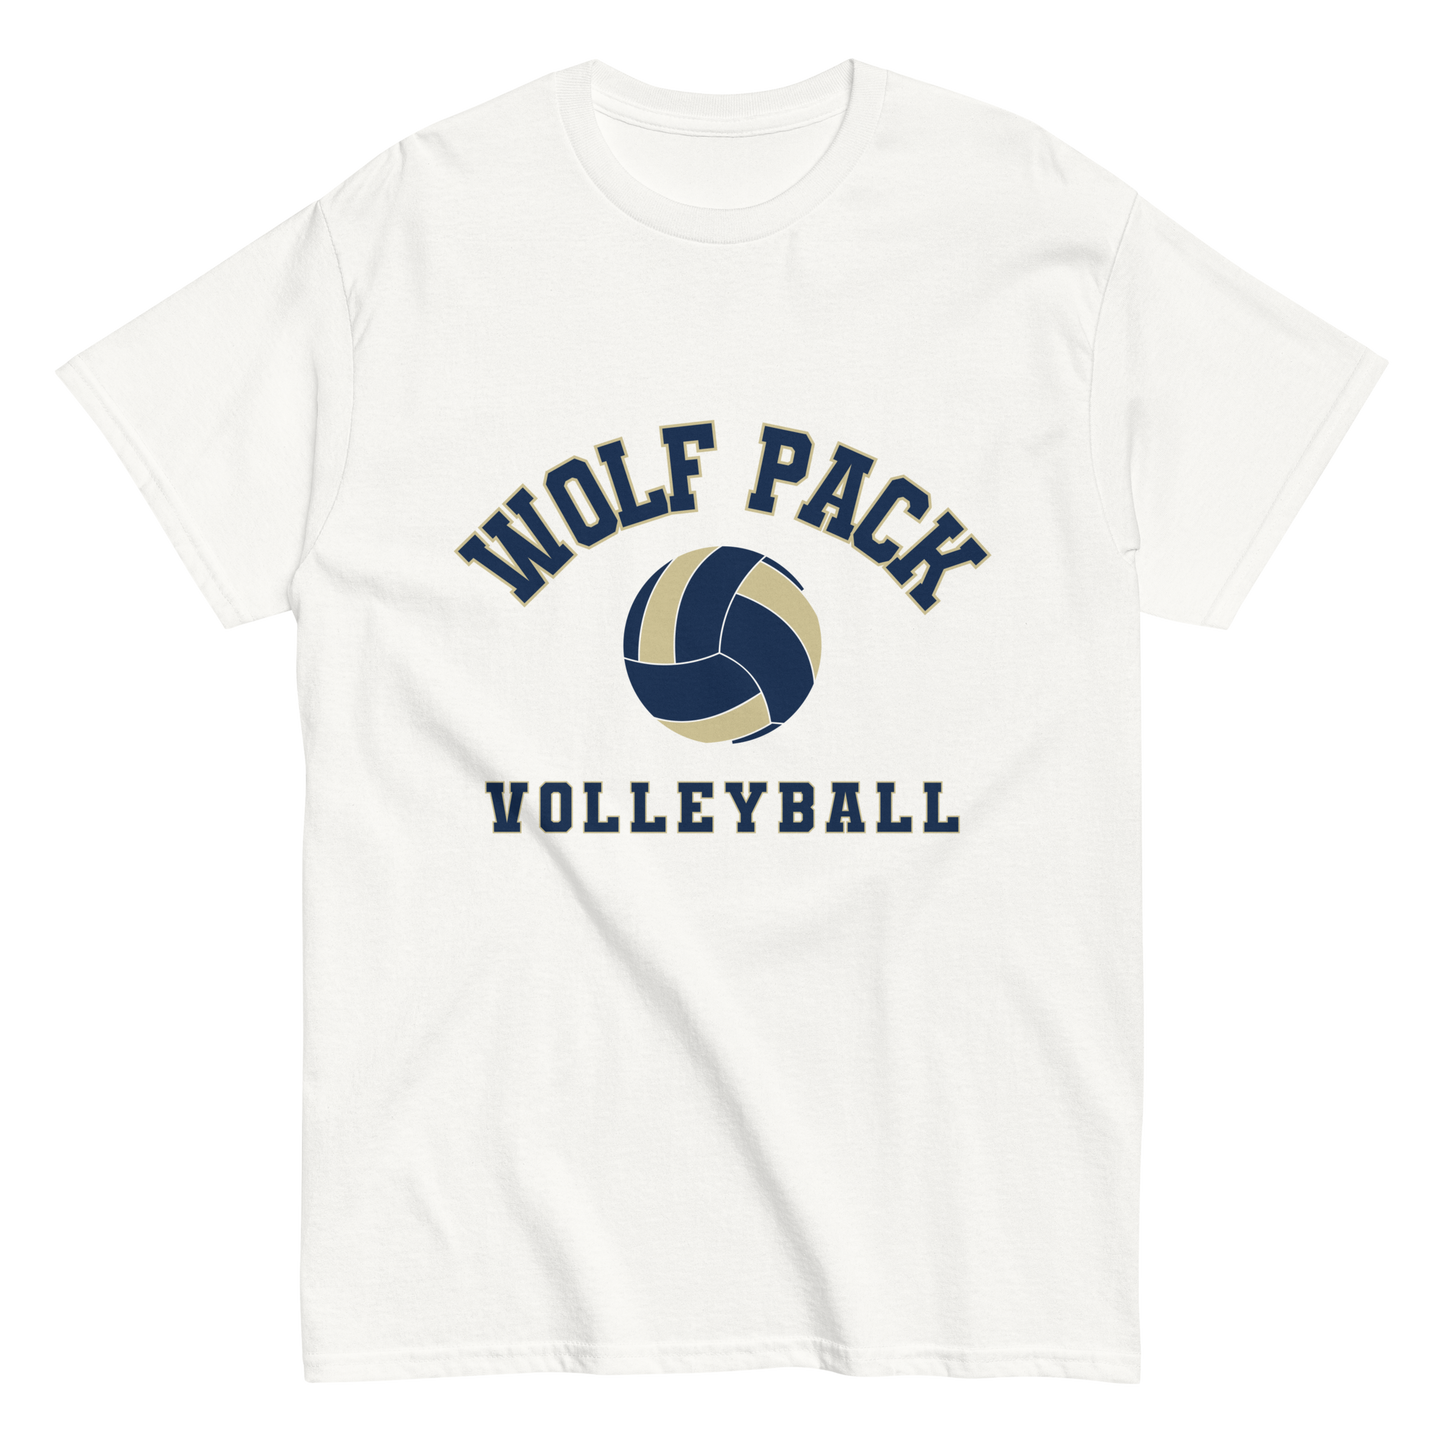 West Volleyball classic tee